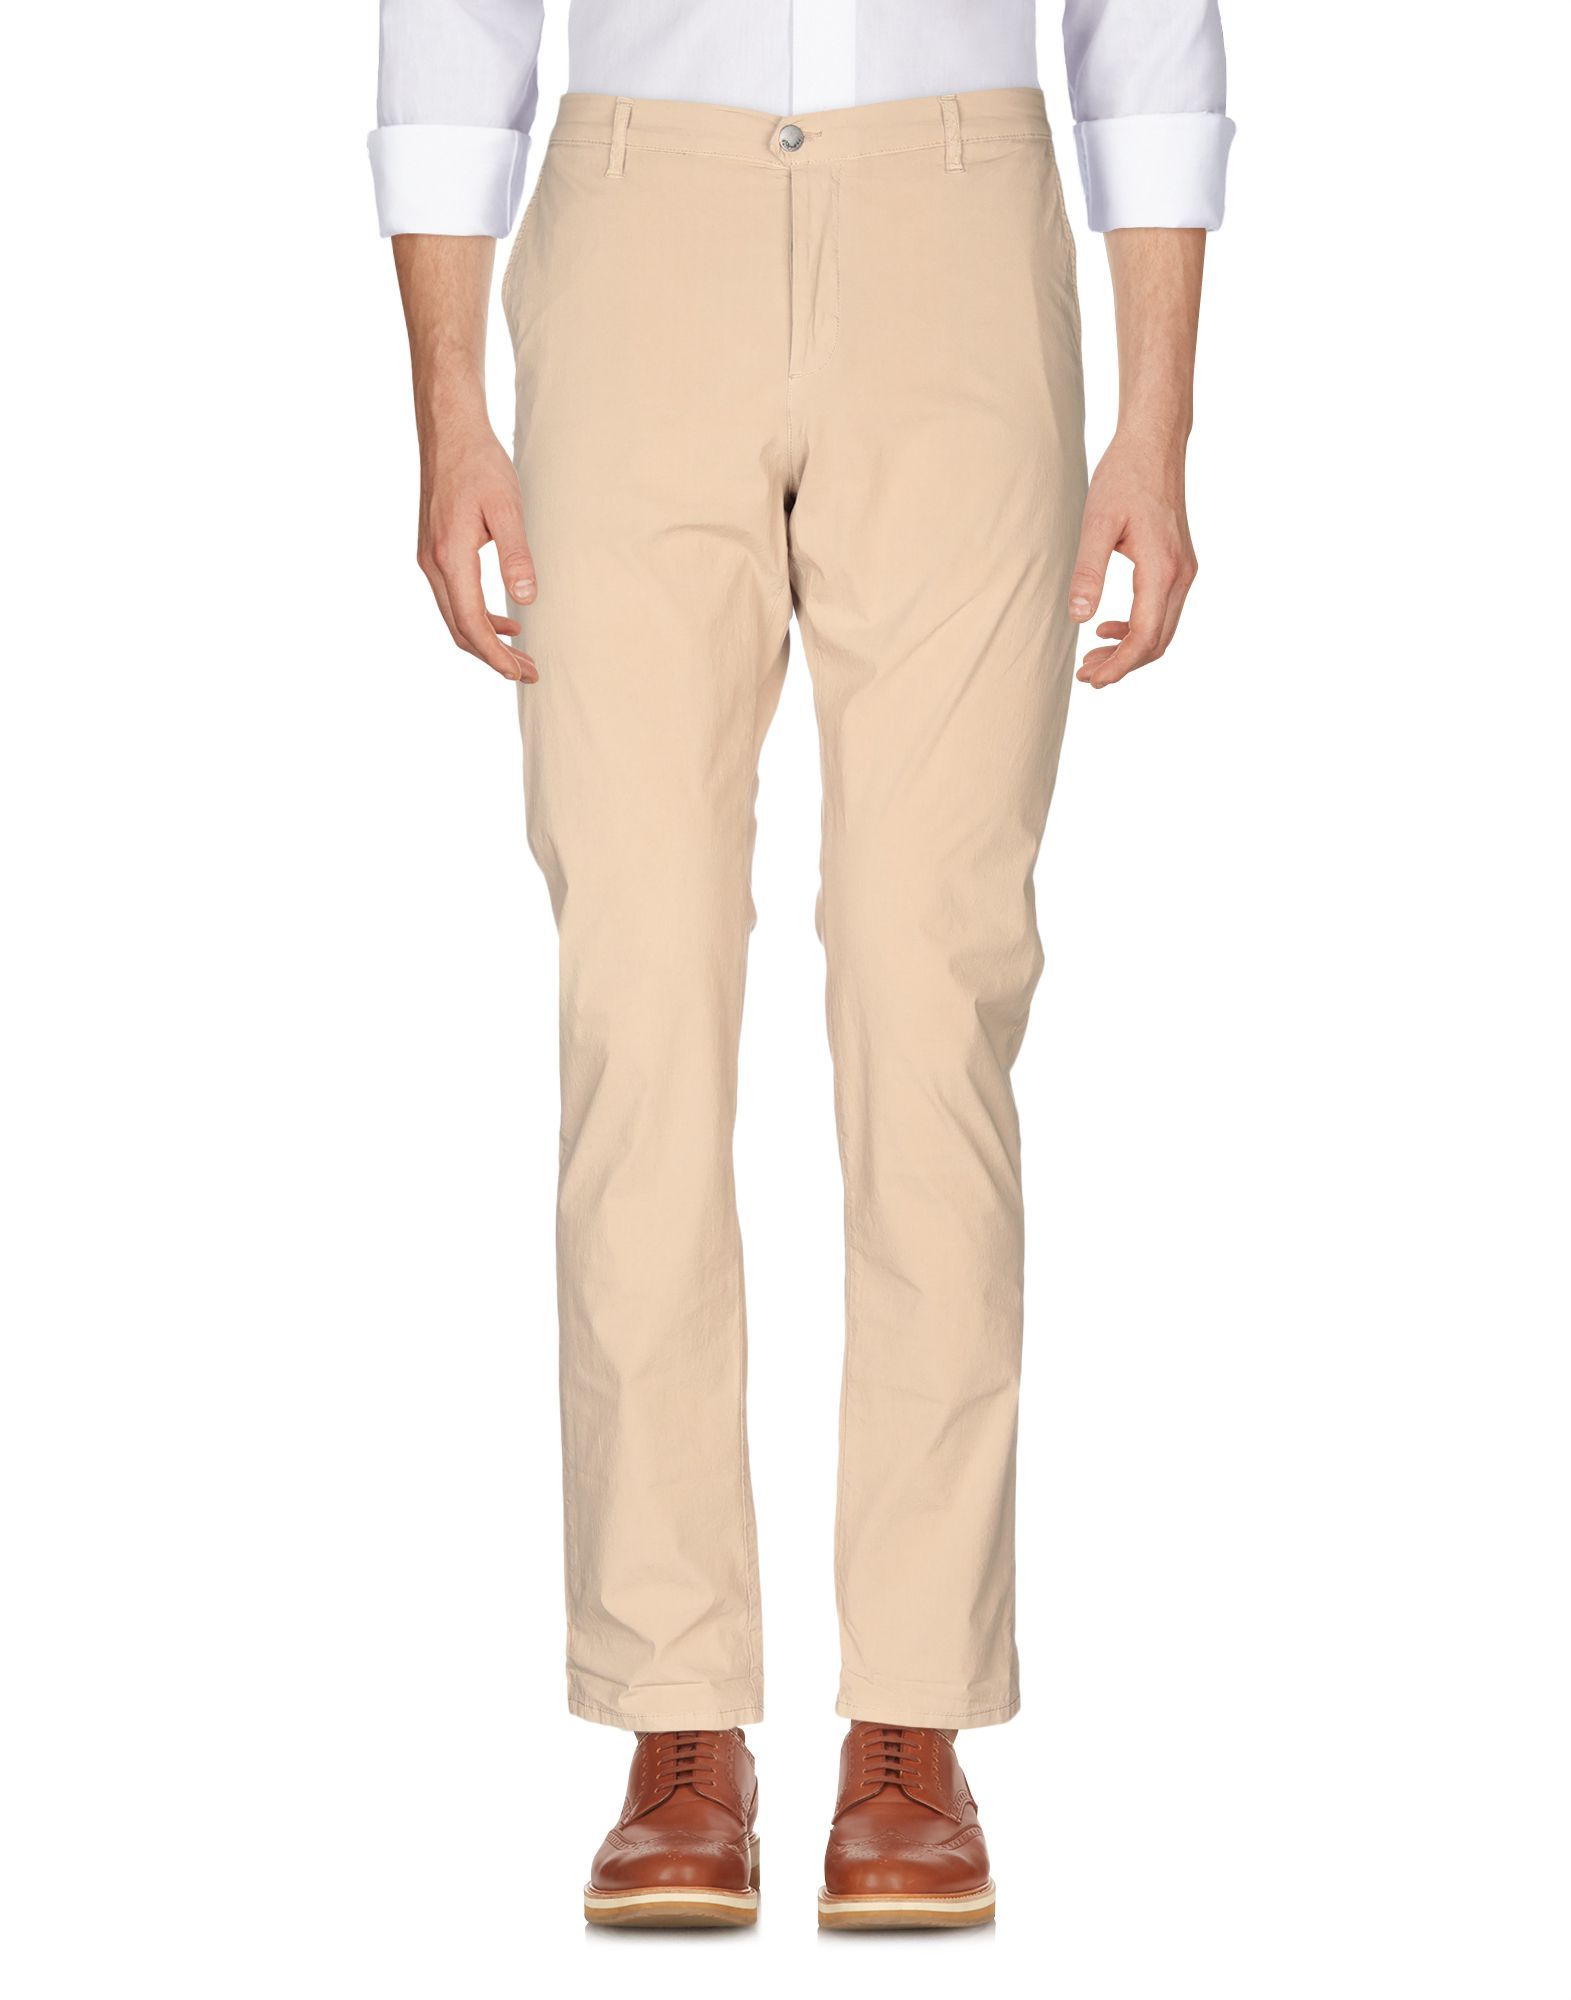 plain weave, logo, basic solid colour, mid rise, regular fit, tapered leg, button closing, multipockets, stretch, chinos, large sized